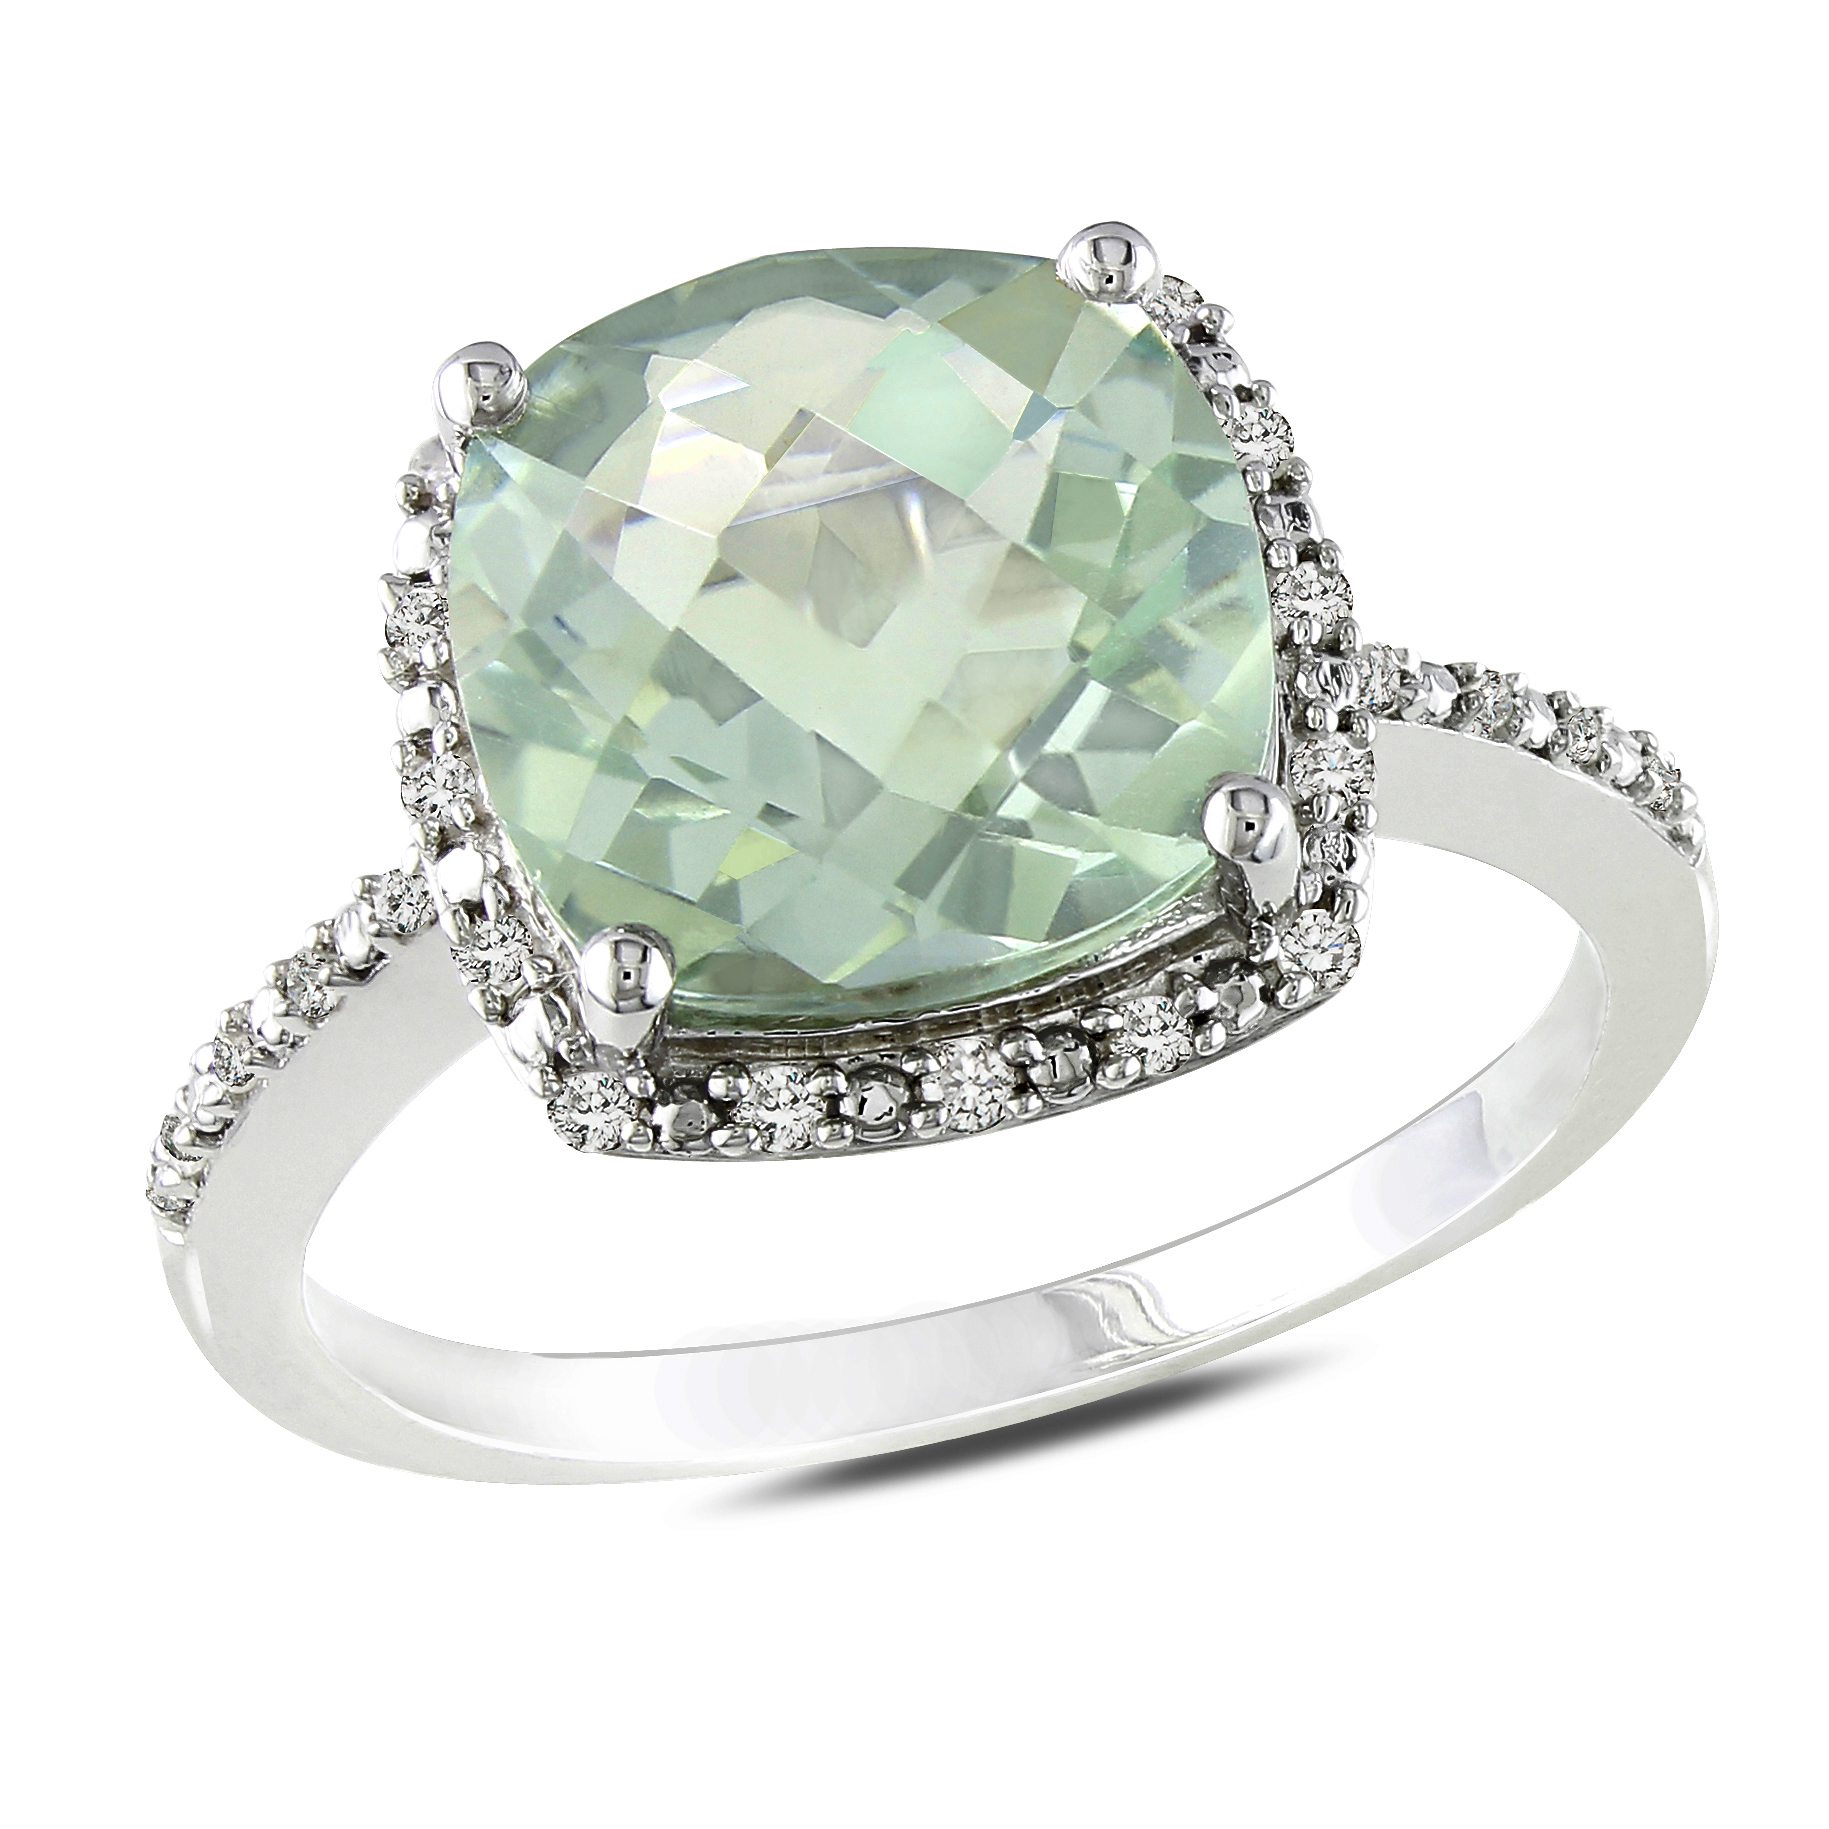 Amour 1/10 Carat T.W. Diamond and 4 Carat T.G.W. Green Amethyst Fashion Ring in Sterling Silver GH I3